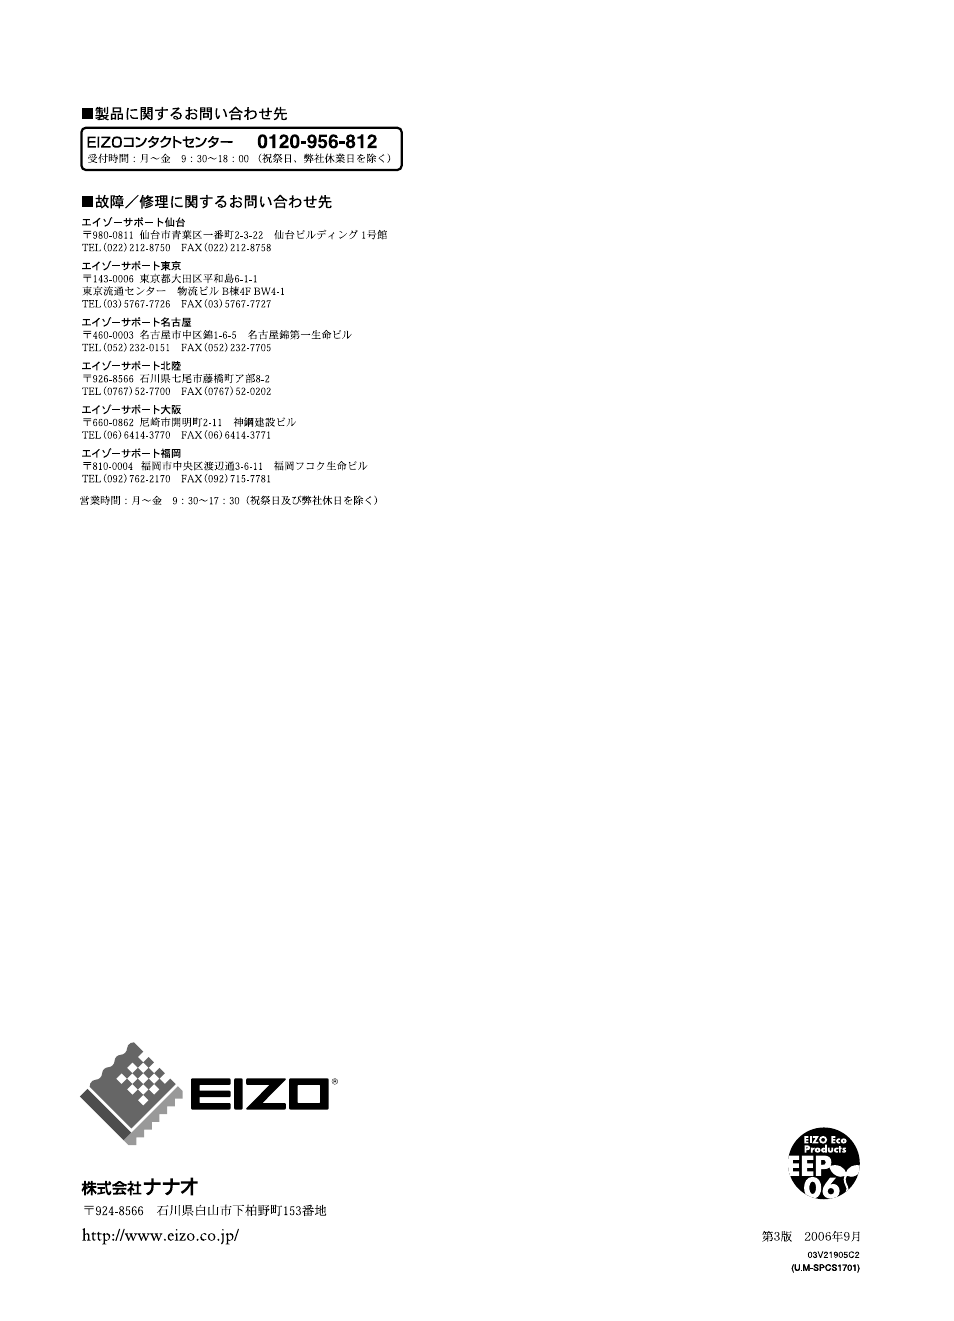 Eizo Flexscan S1701 User Manual Page 37 37 Also For Flexscan S1721 セットアップガイド Flexscan S1731 Flexscan S1901 Flexscan S1911 セットアップガイド Flexscan S1921 セットアップガイド Flexscan S1931 セットアップガイド